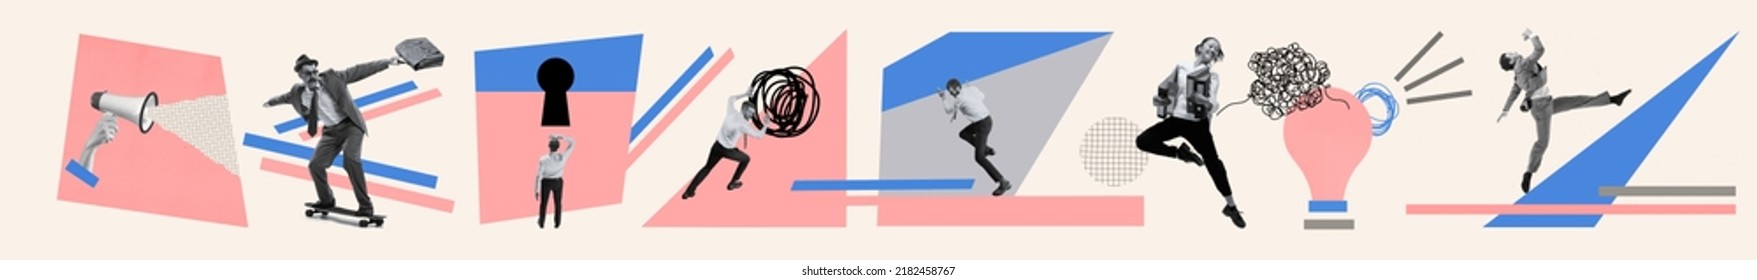 Business process. Contemporary art collage made of shots of young men and women, managers working hardly isolated over white background, Concept of art, finance, career, co-workers, team. Flyer - Shutterstock ID 2182458767